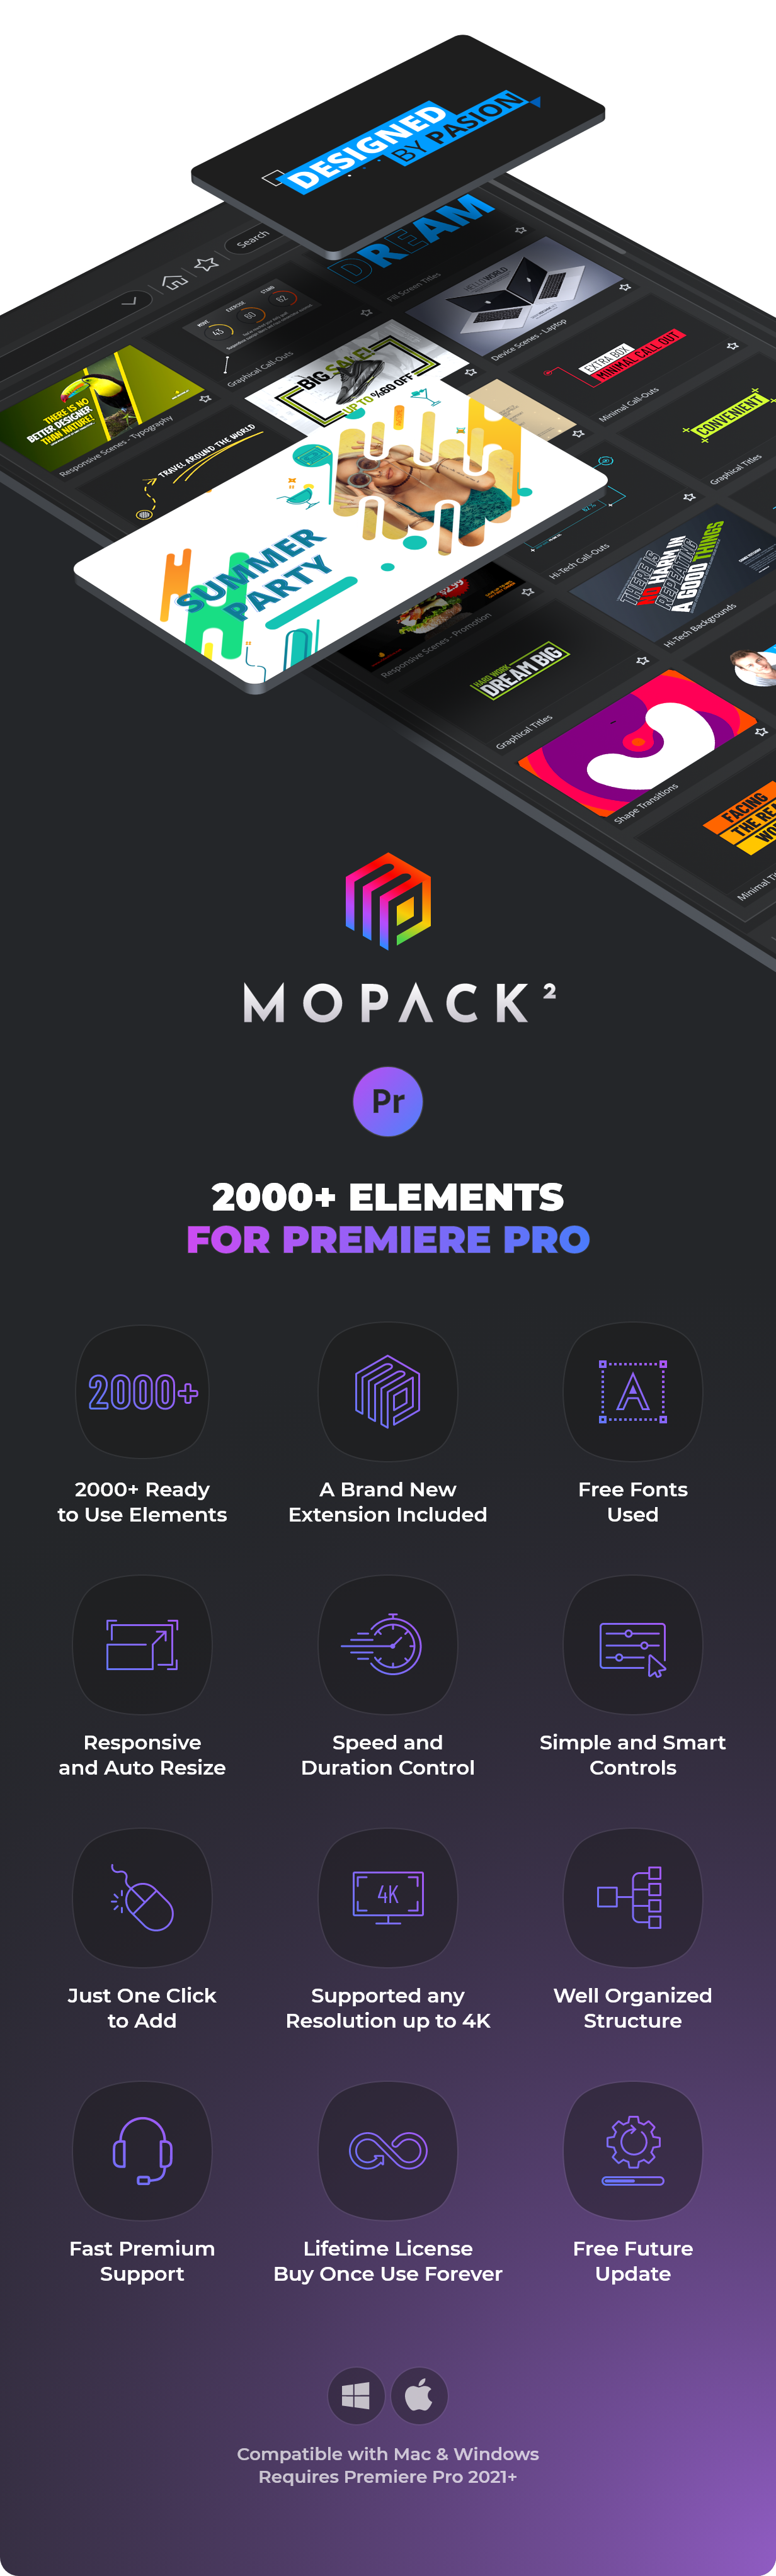 MoPack - Motion Graphics Pack for Premiere Pro - 3